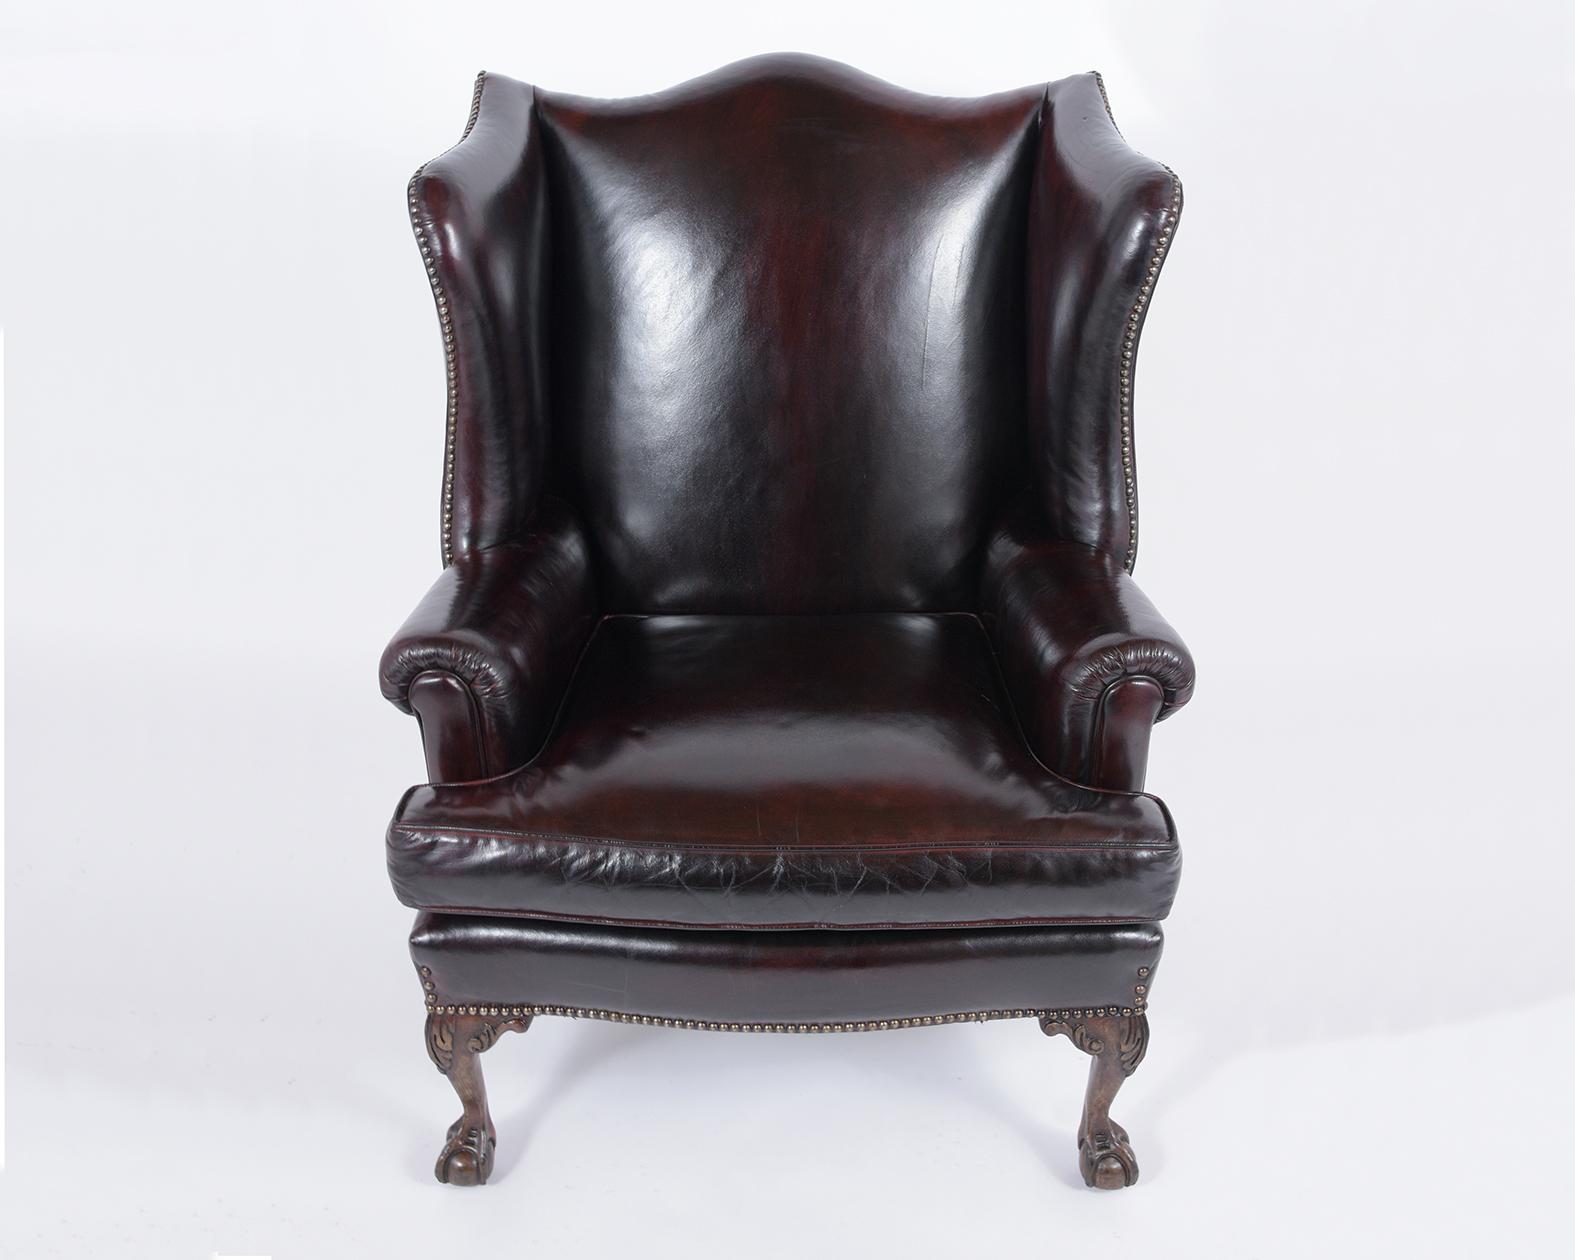 This 1970s wingback chair handcrafted out of solid wood, upholstered in comfortable leather, and is professionally restored. This elegant club chair features a wingback scroll arm a single cushion upholstery in a leather newly dyed in a dark